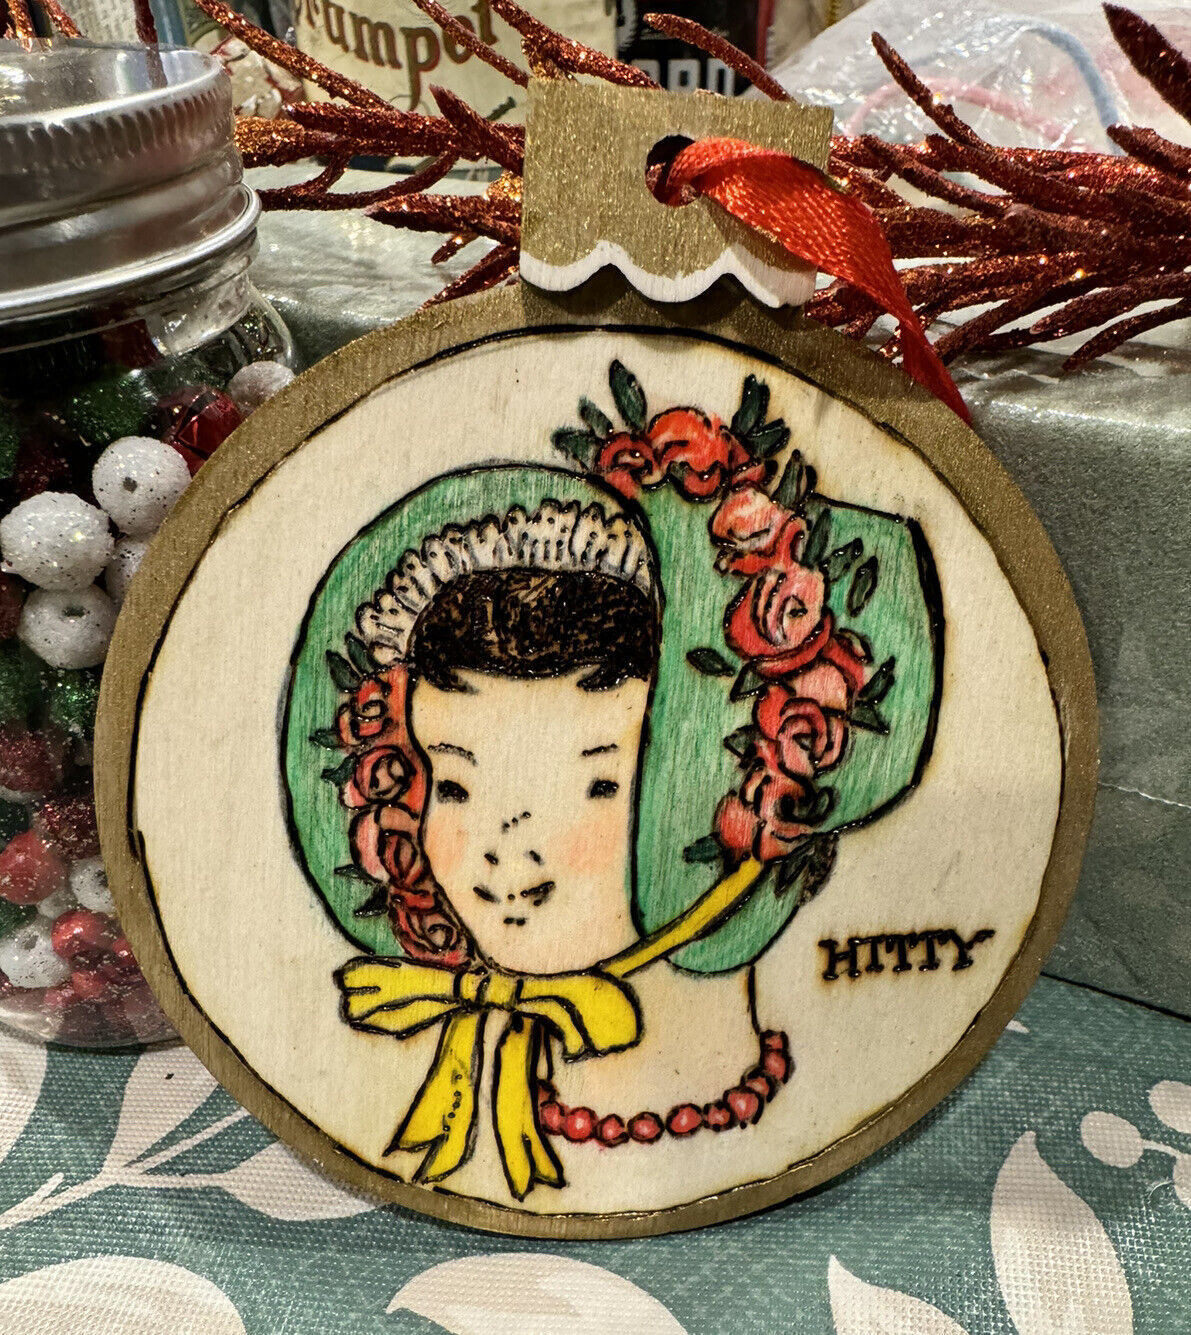 Hand Crafted Hitty Doll Wooden Christmas Ornament Pyrography Wood Burning by dlb